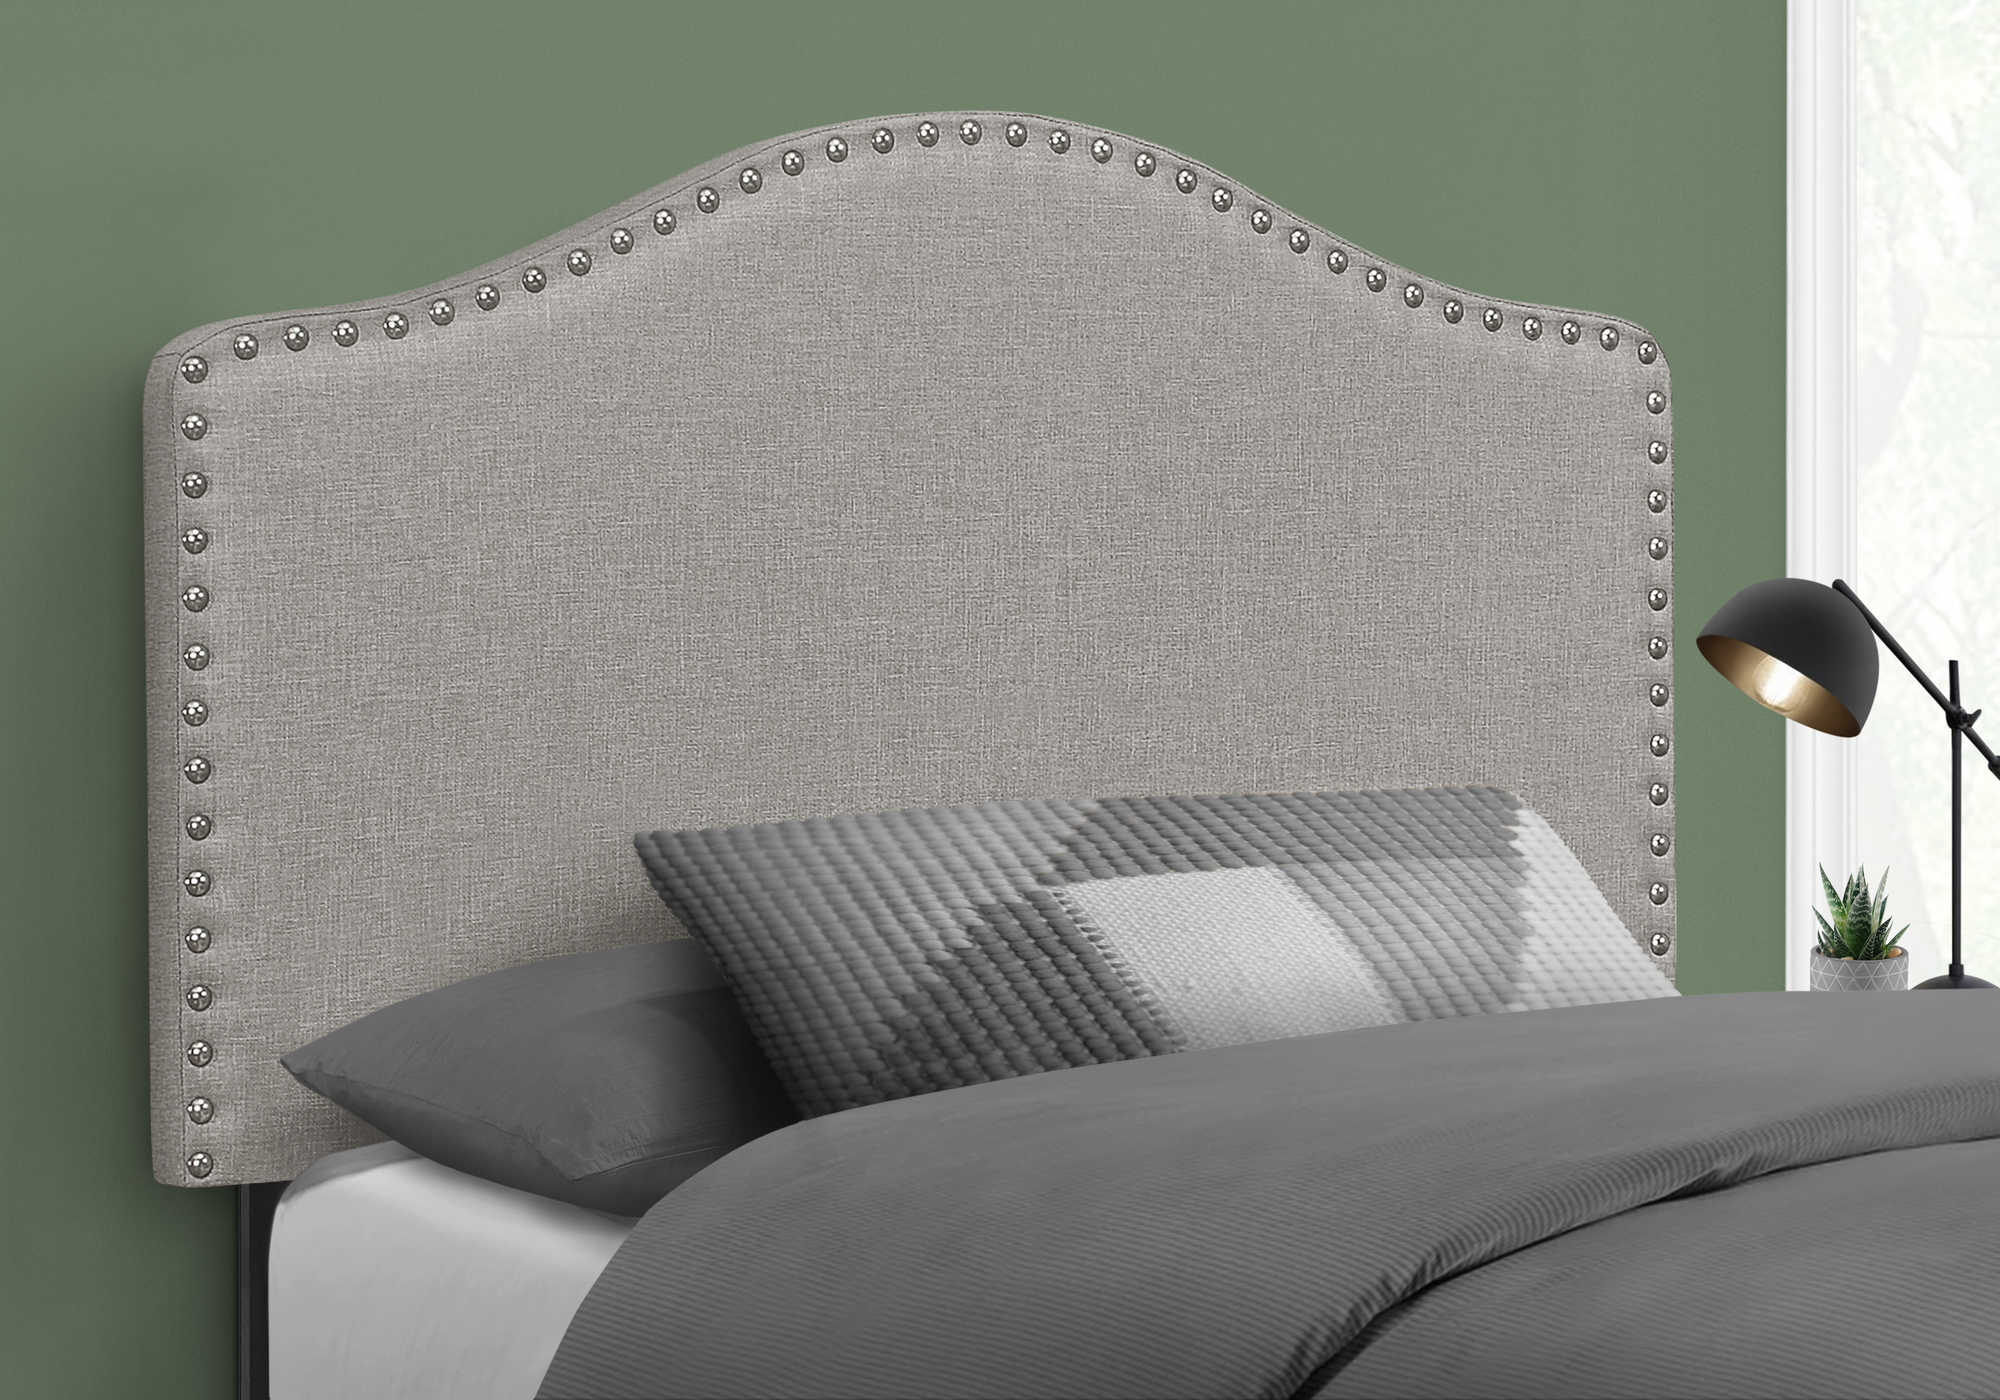 BED - TWIN SIZE / GREY LINEN HEADBOARD ONLY